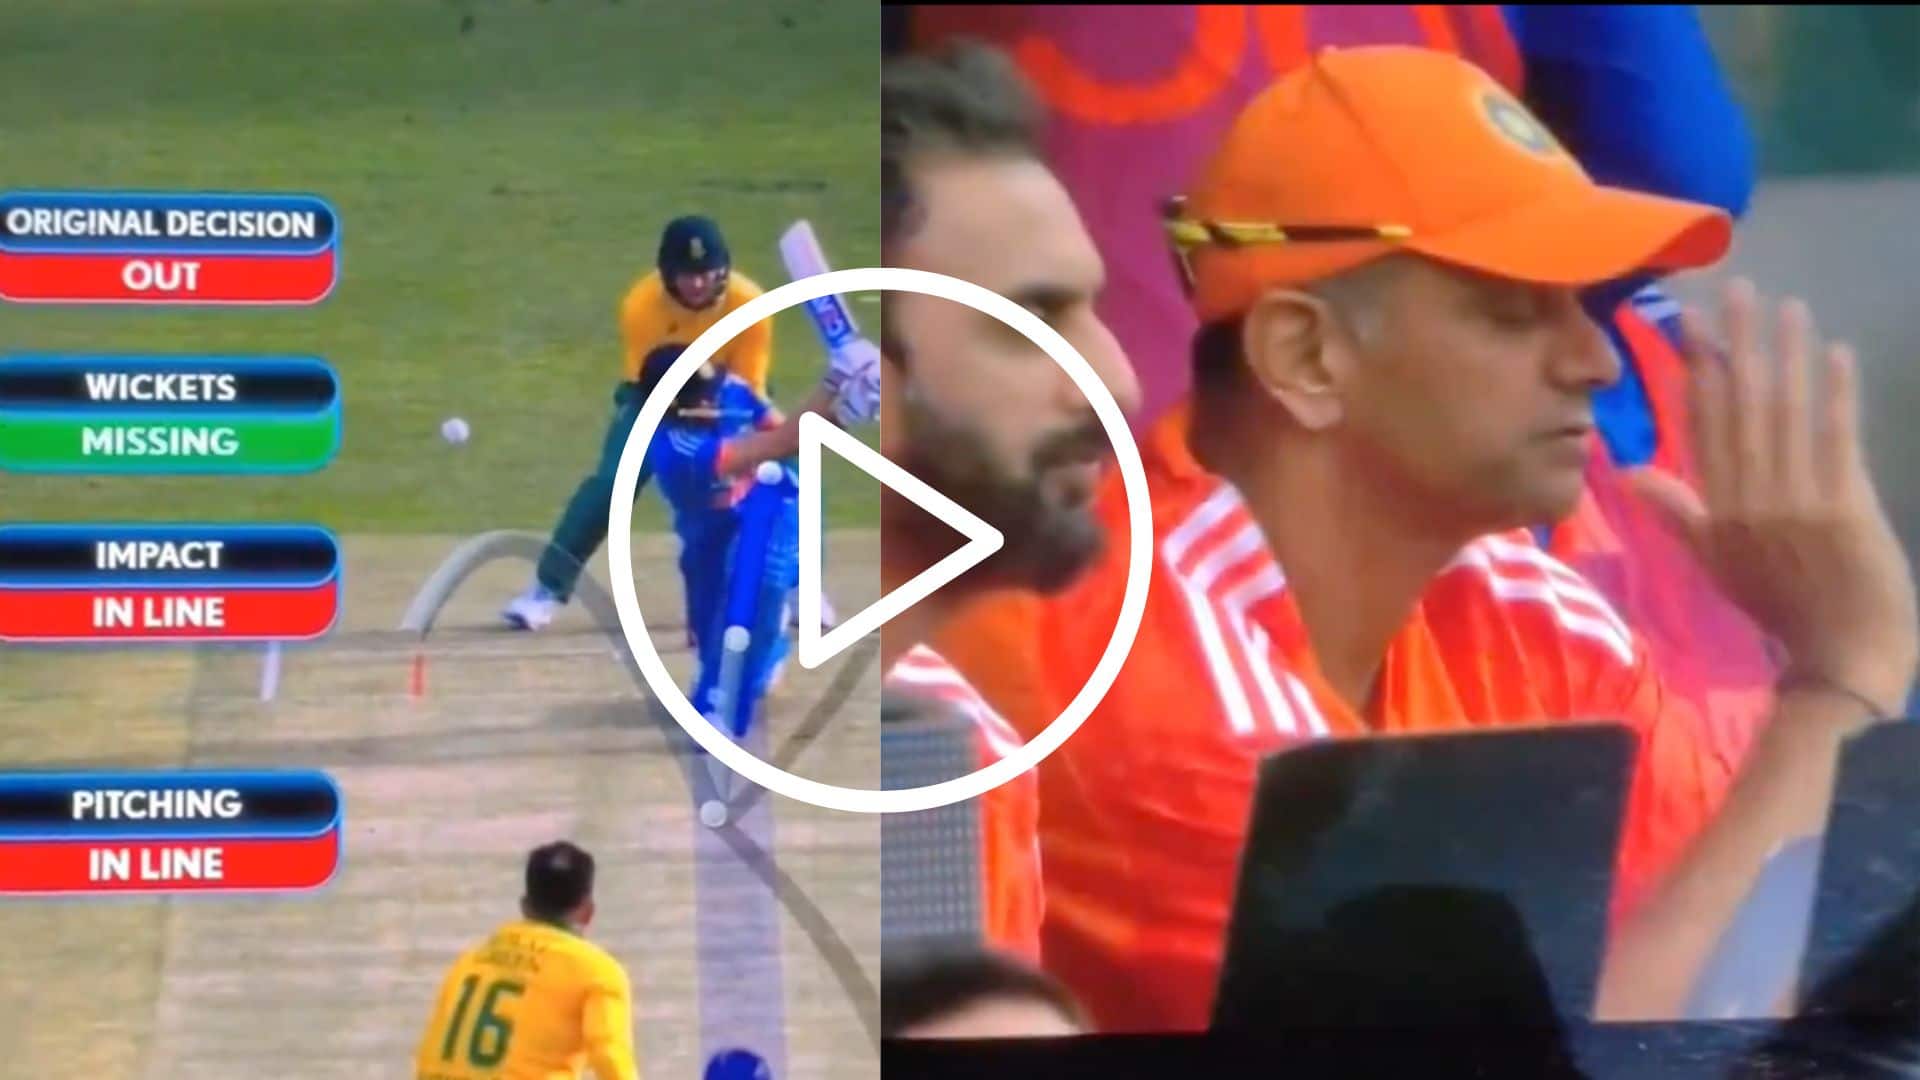 [Watch] Rahul Dravid ‘Furious’ As Shubman Gill Throws Away Wicket By Not Taking DRS